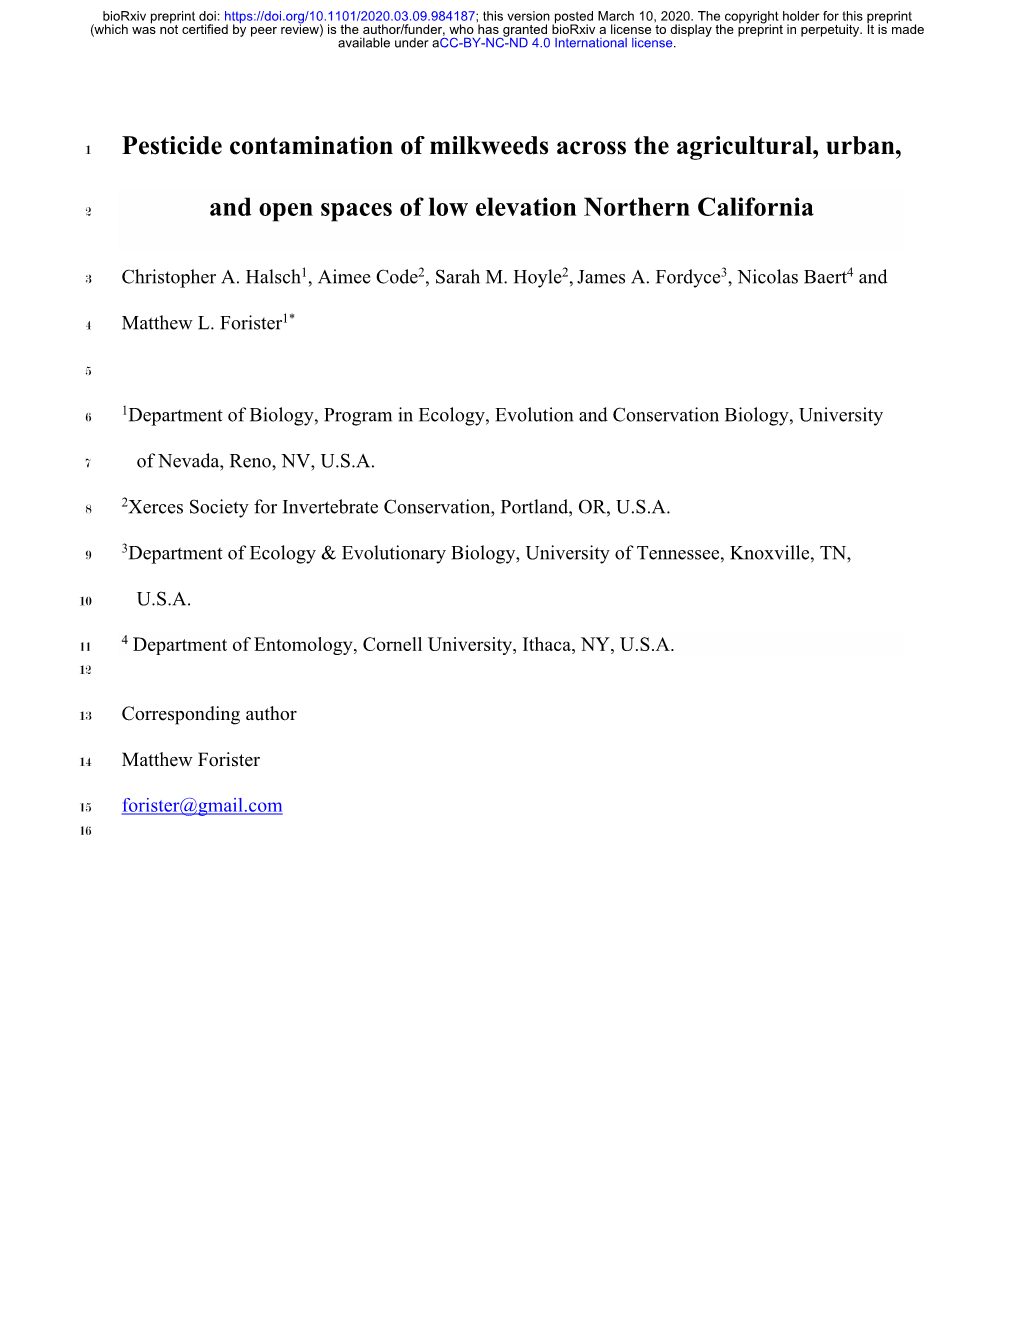 Pesticide Contamination of Milkweeds Across the Agricultural, Urban, and Open Spaces of Low Elevation Northern California